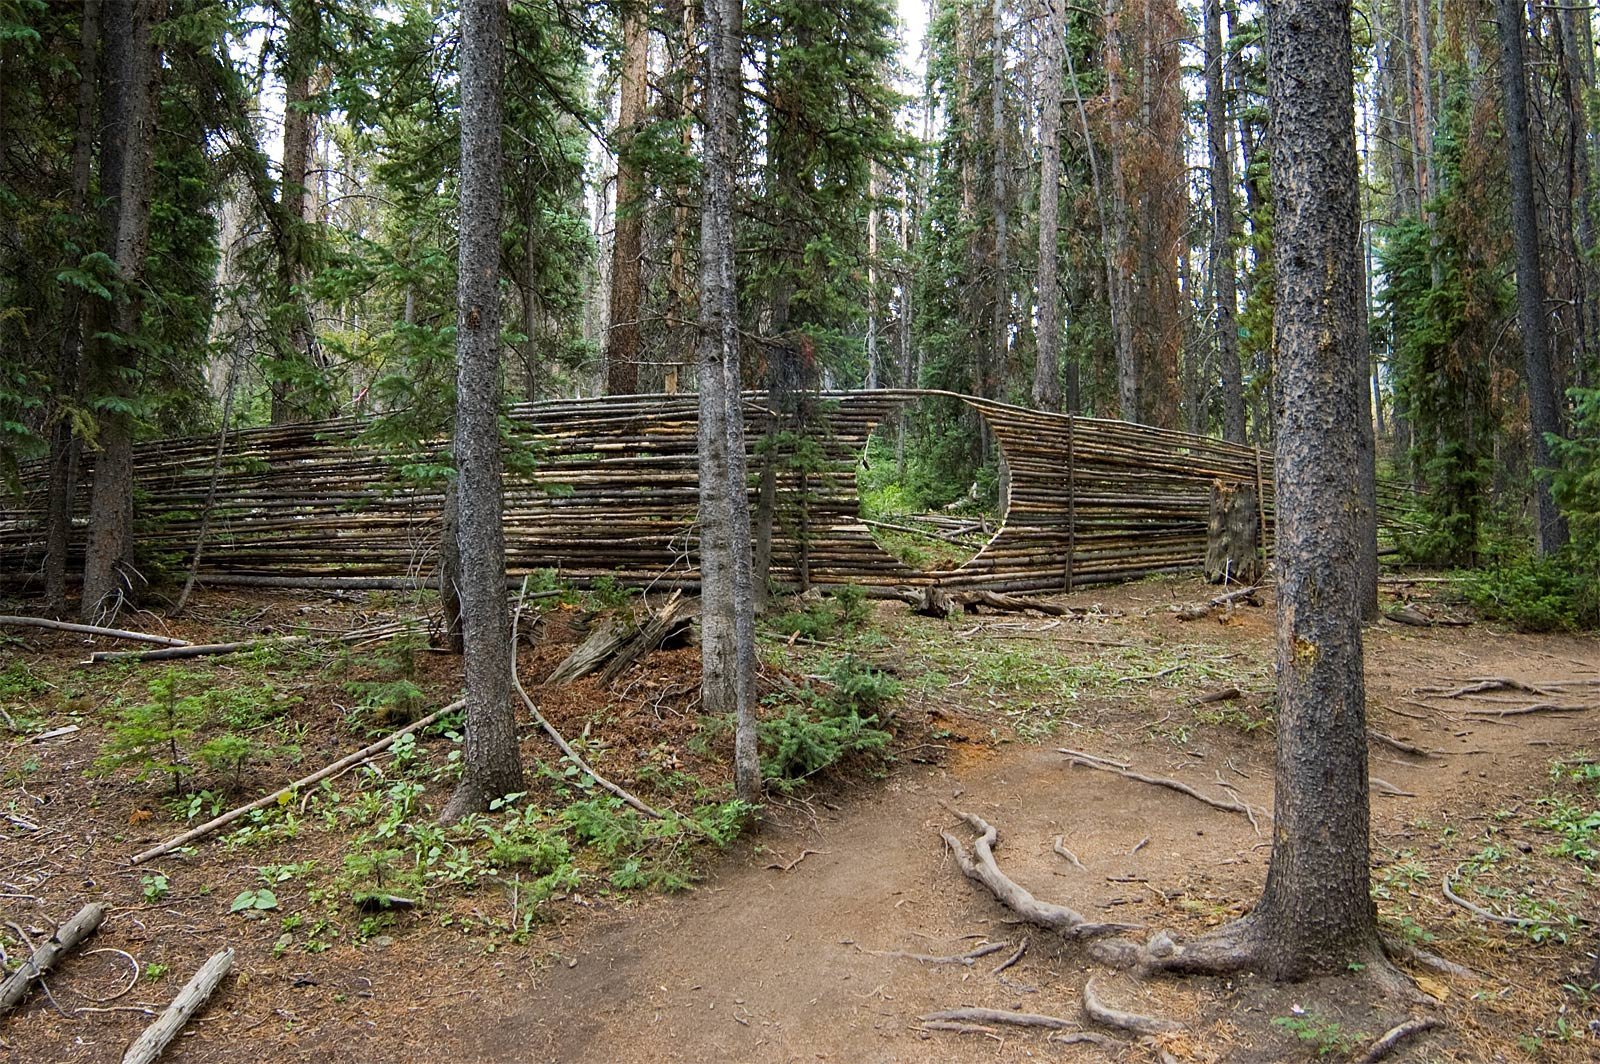 Sculpture made from dead and down lodgepole pines in the open space forest near Breckenrdige